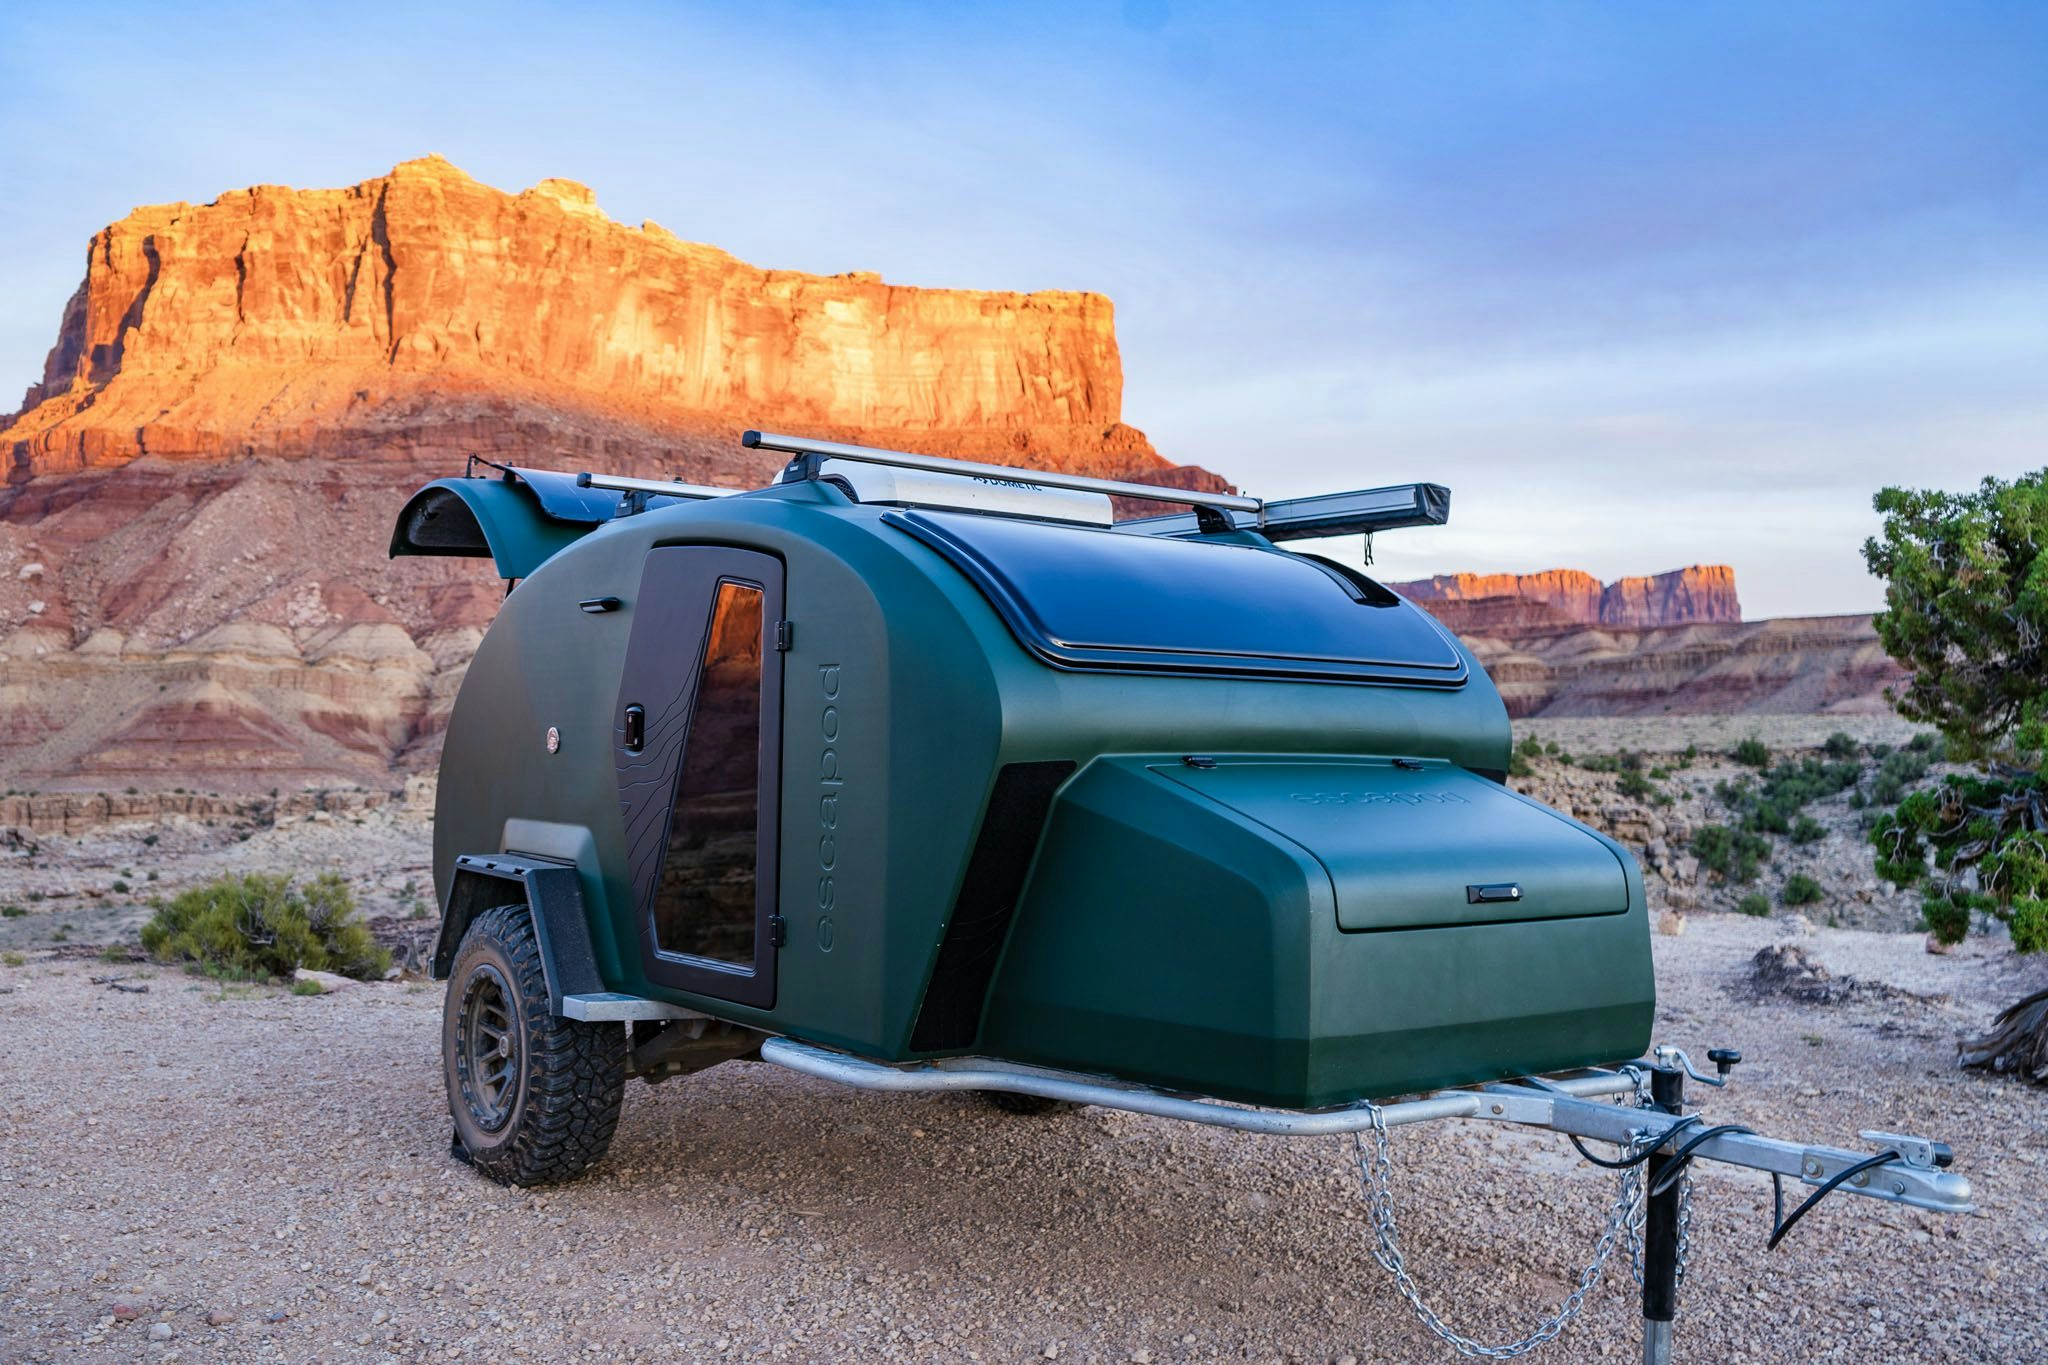 TOPO2, an adventure camper parked in front of Utah's scenery